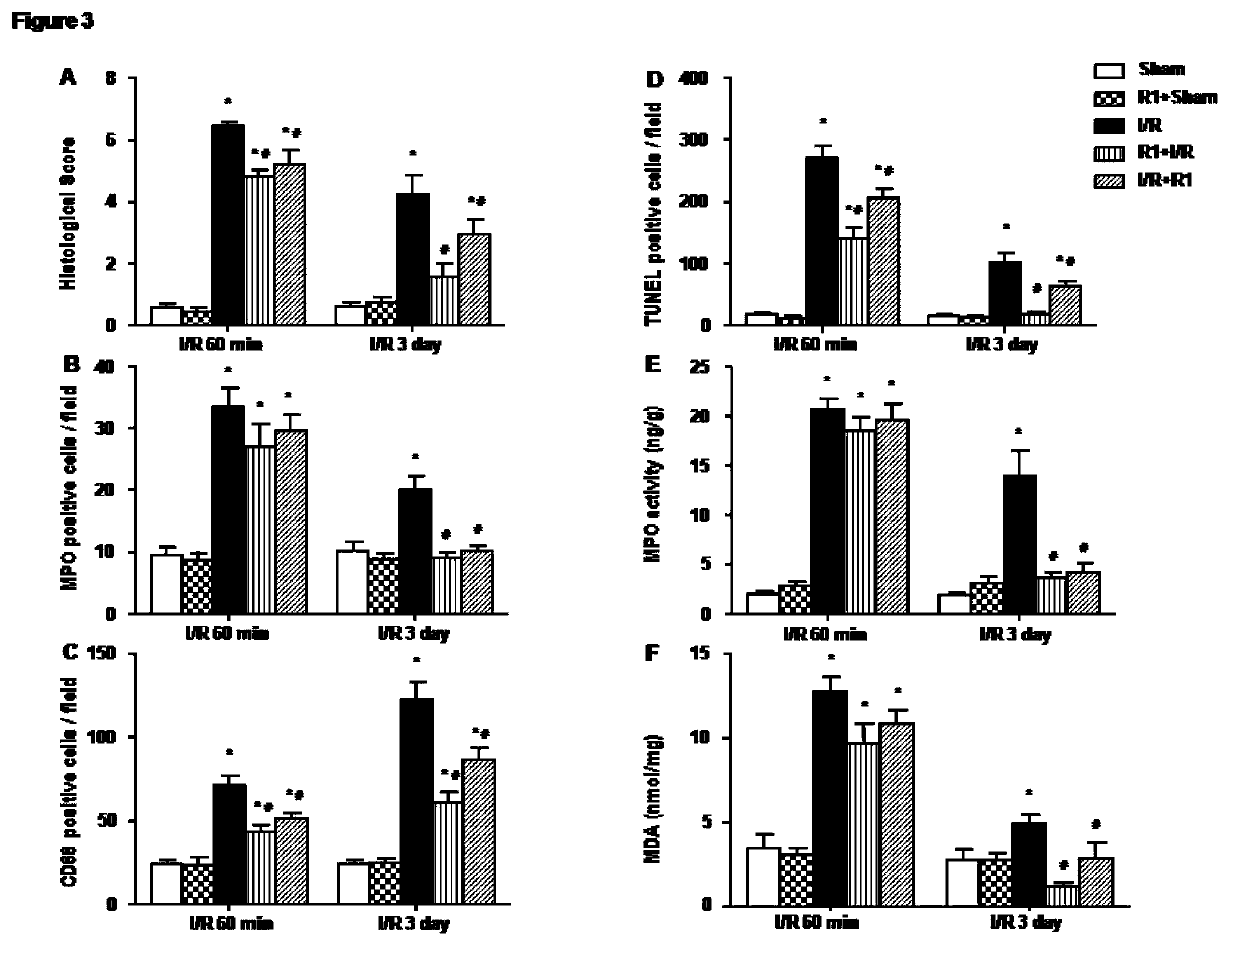 Protective effect of notoginsenoside R1 on small intestine ischemia/reperfusion injury